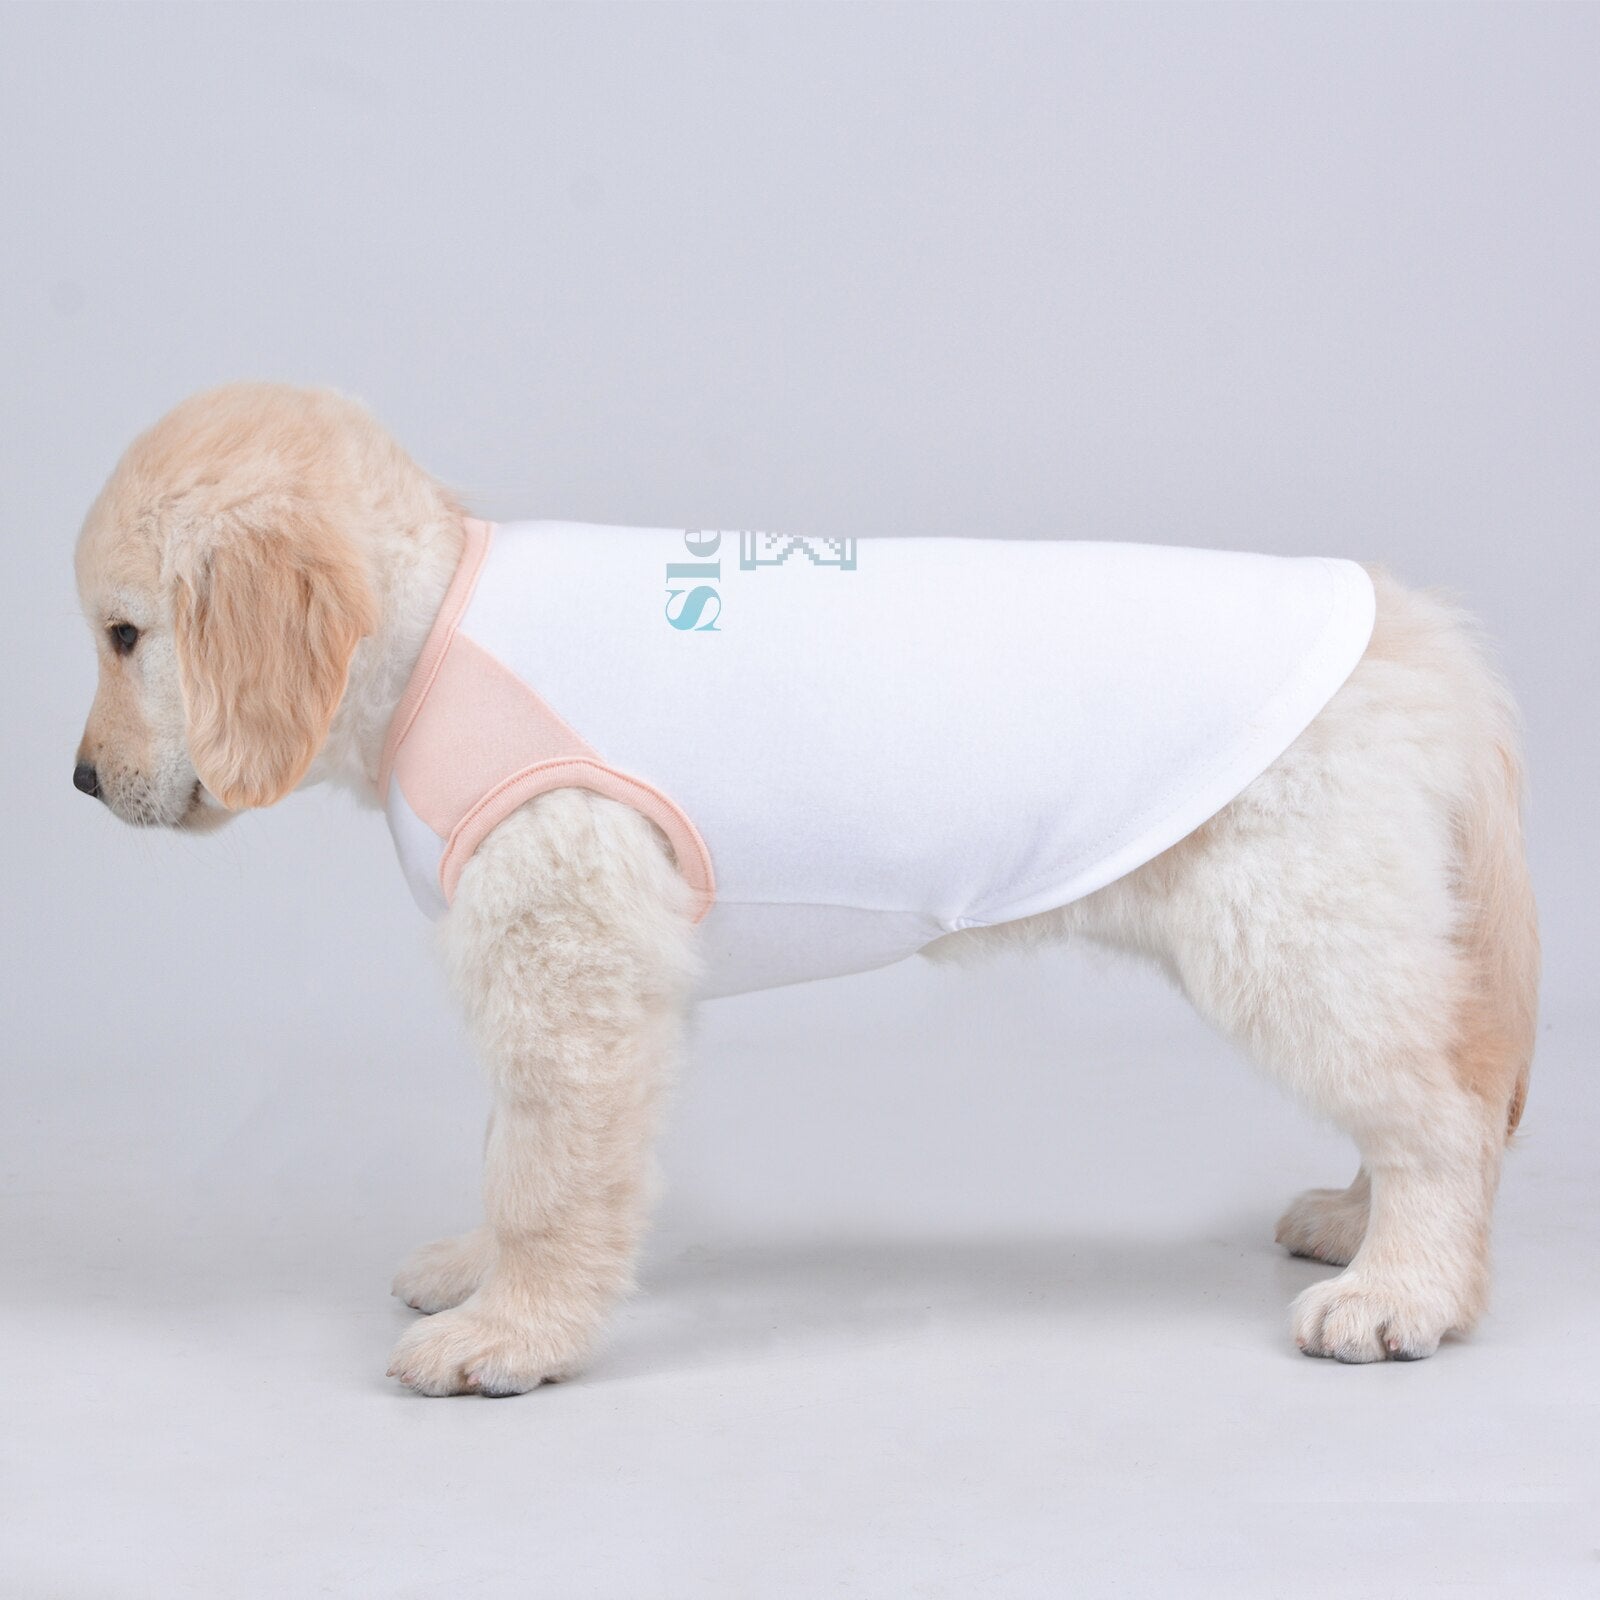 Sleveless Tshirt for Small Medium Large Dogs and Cats, Summer Special Breathale Fabric, Cute and Classic Simple Tee